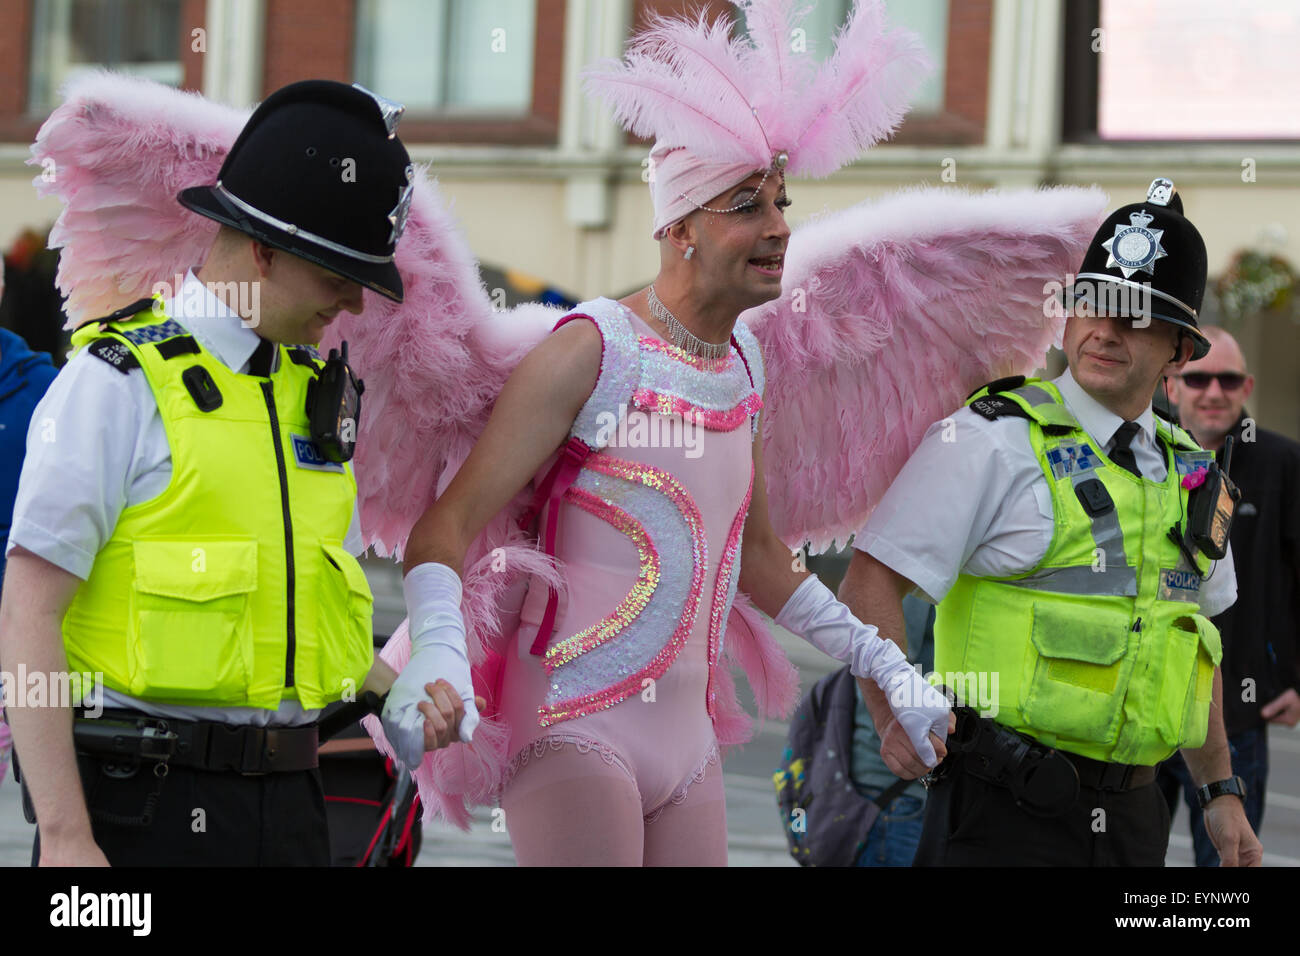 Stockton-on-Tees, UK, Saturday, 1st August, 2015. A male street performer, in full costume as a pink angel, interacts with two officers from Cleveland Police, dressed in their normal police uniform, at Instant Light, the 28th Stockton International Riverside Festival. Stock Photo